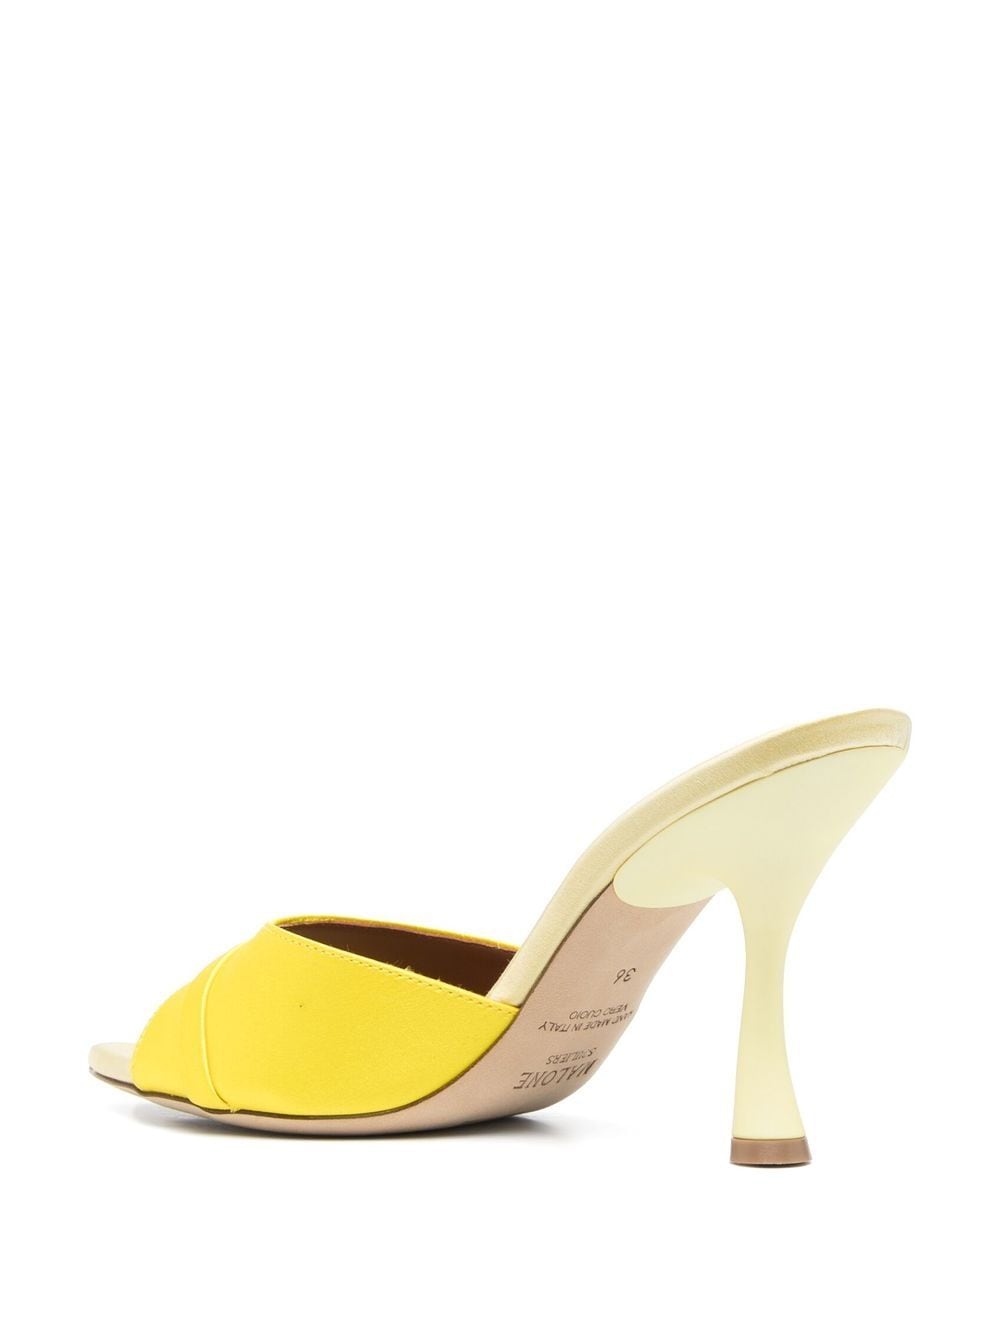 Malone Souliers Malone Souliers Sandals Yellow